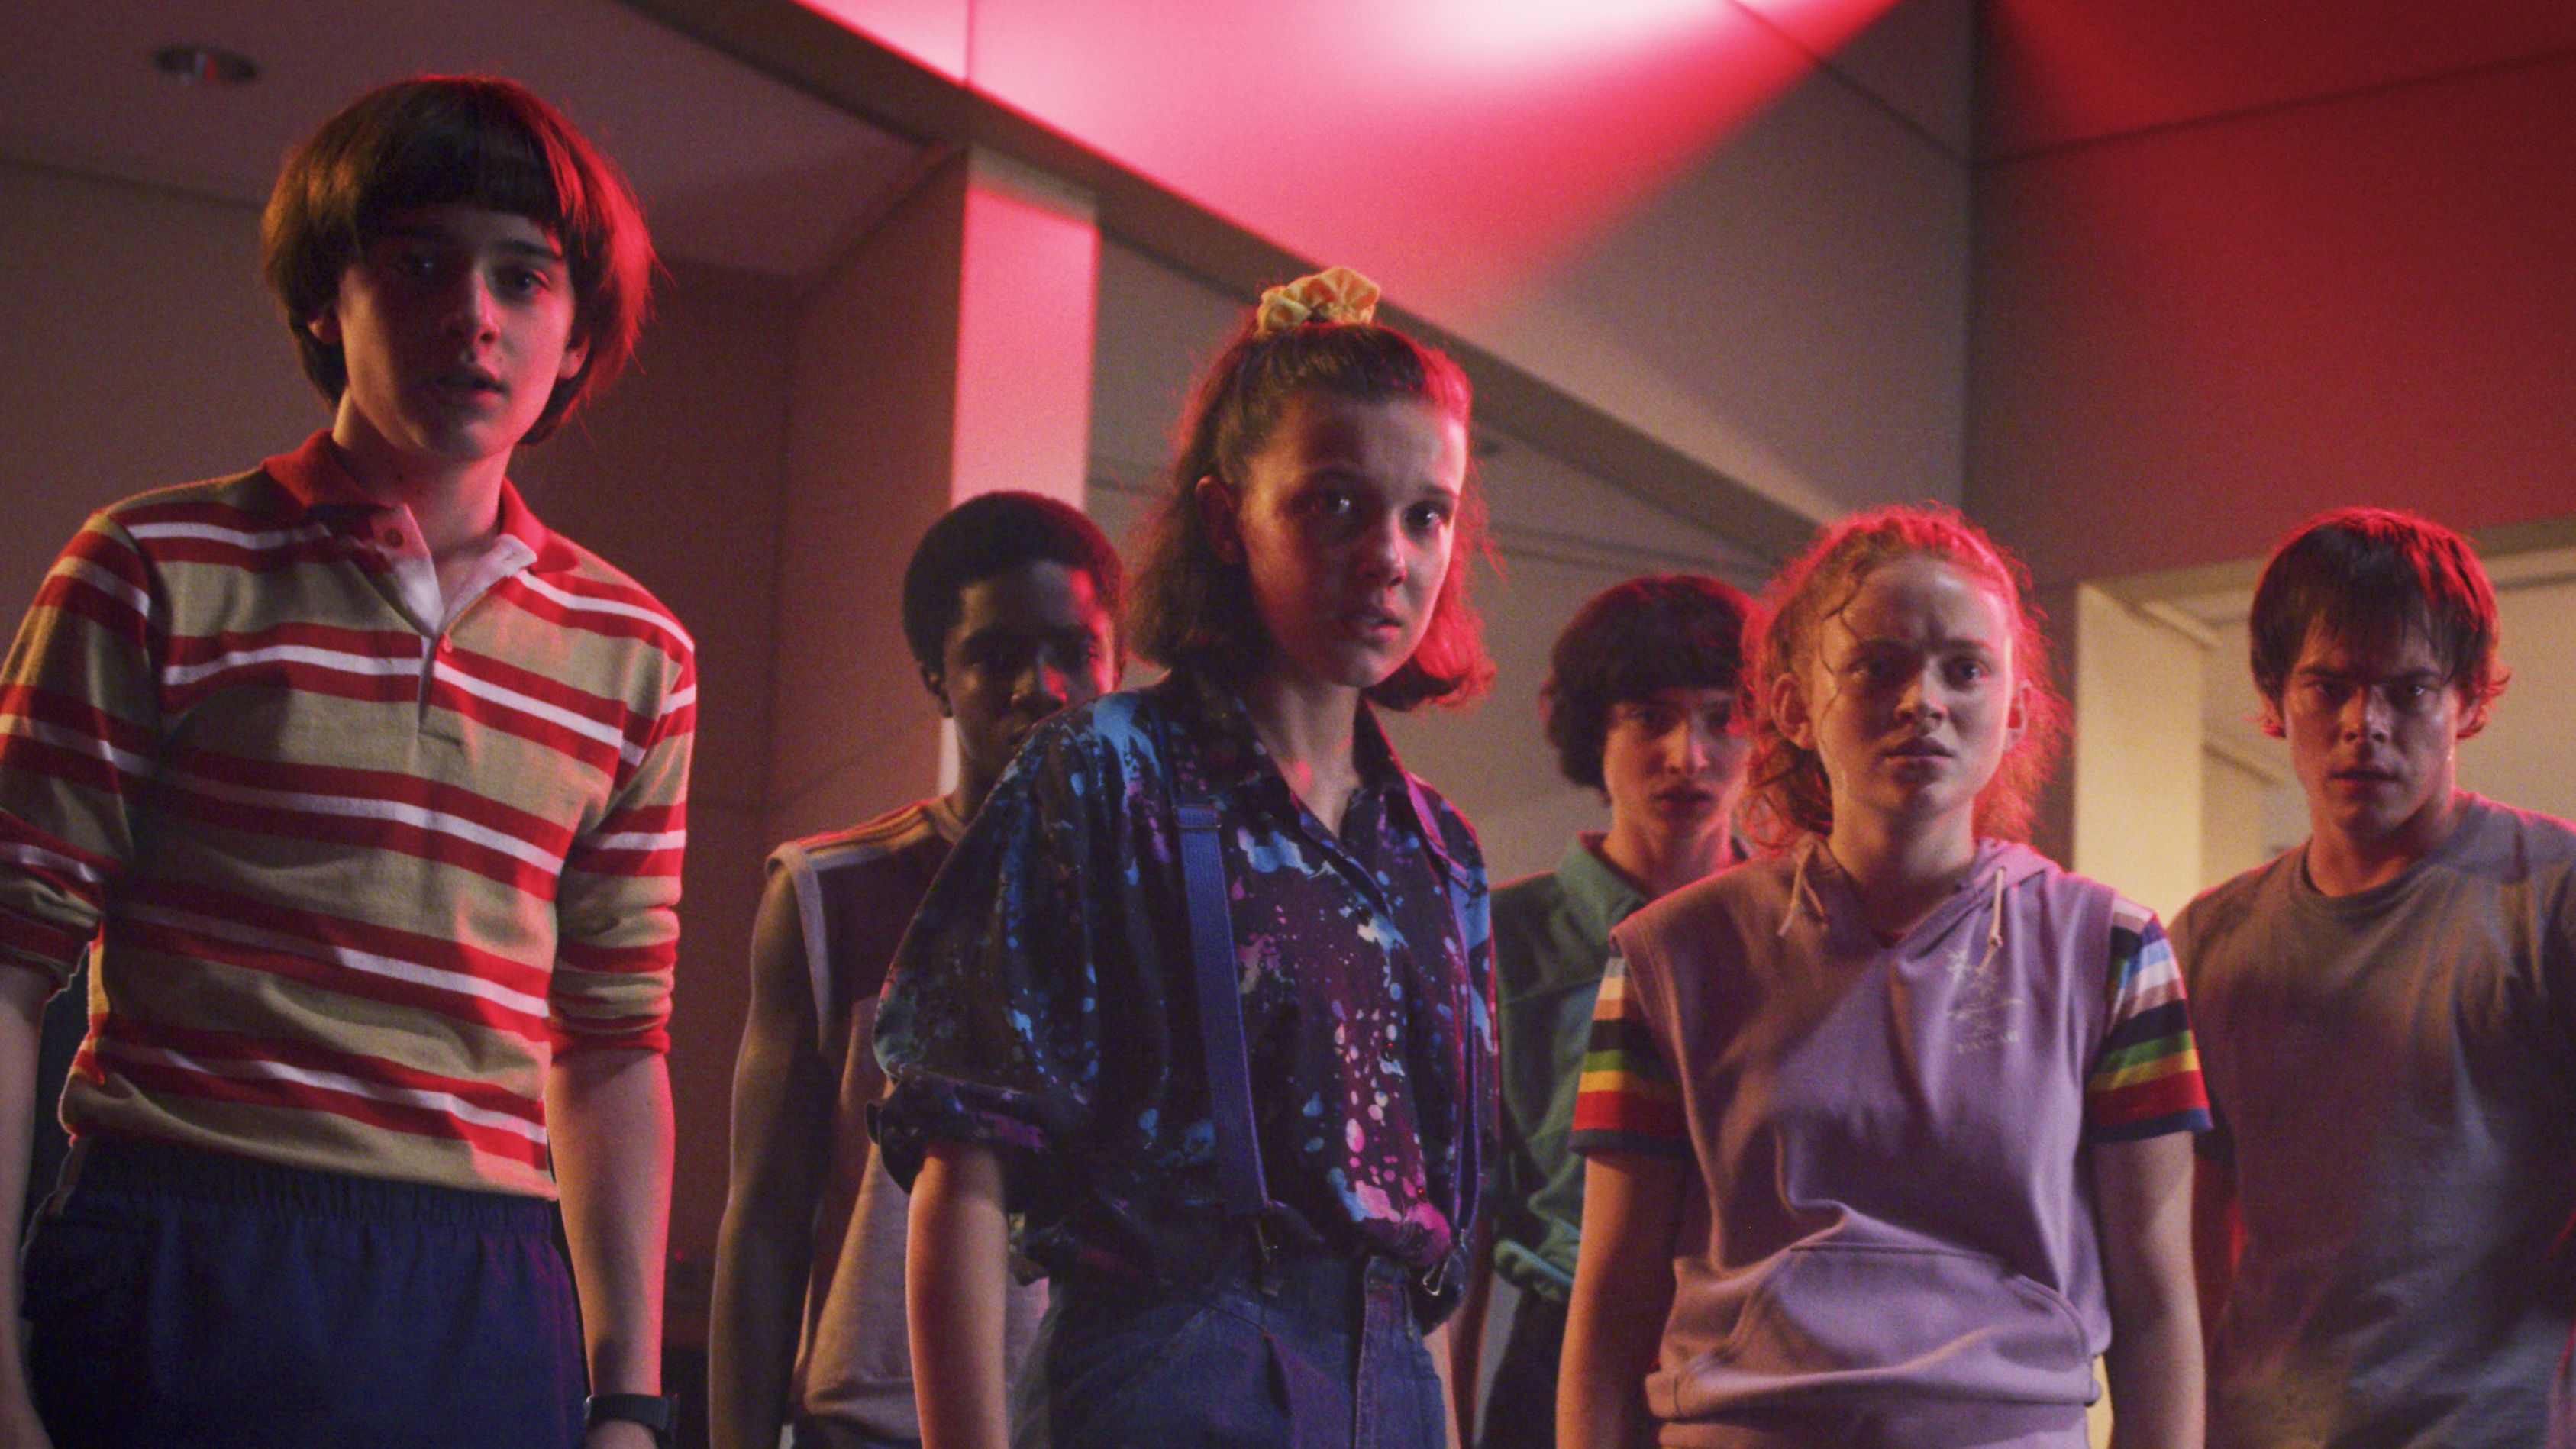 One Stranger Things Actor Just Debunked The Most Popular Season 2 Theory